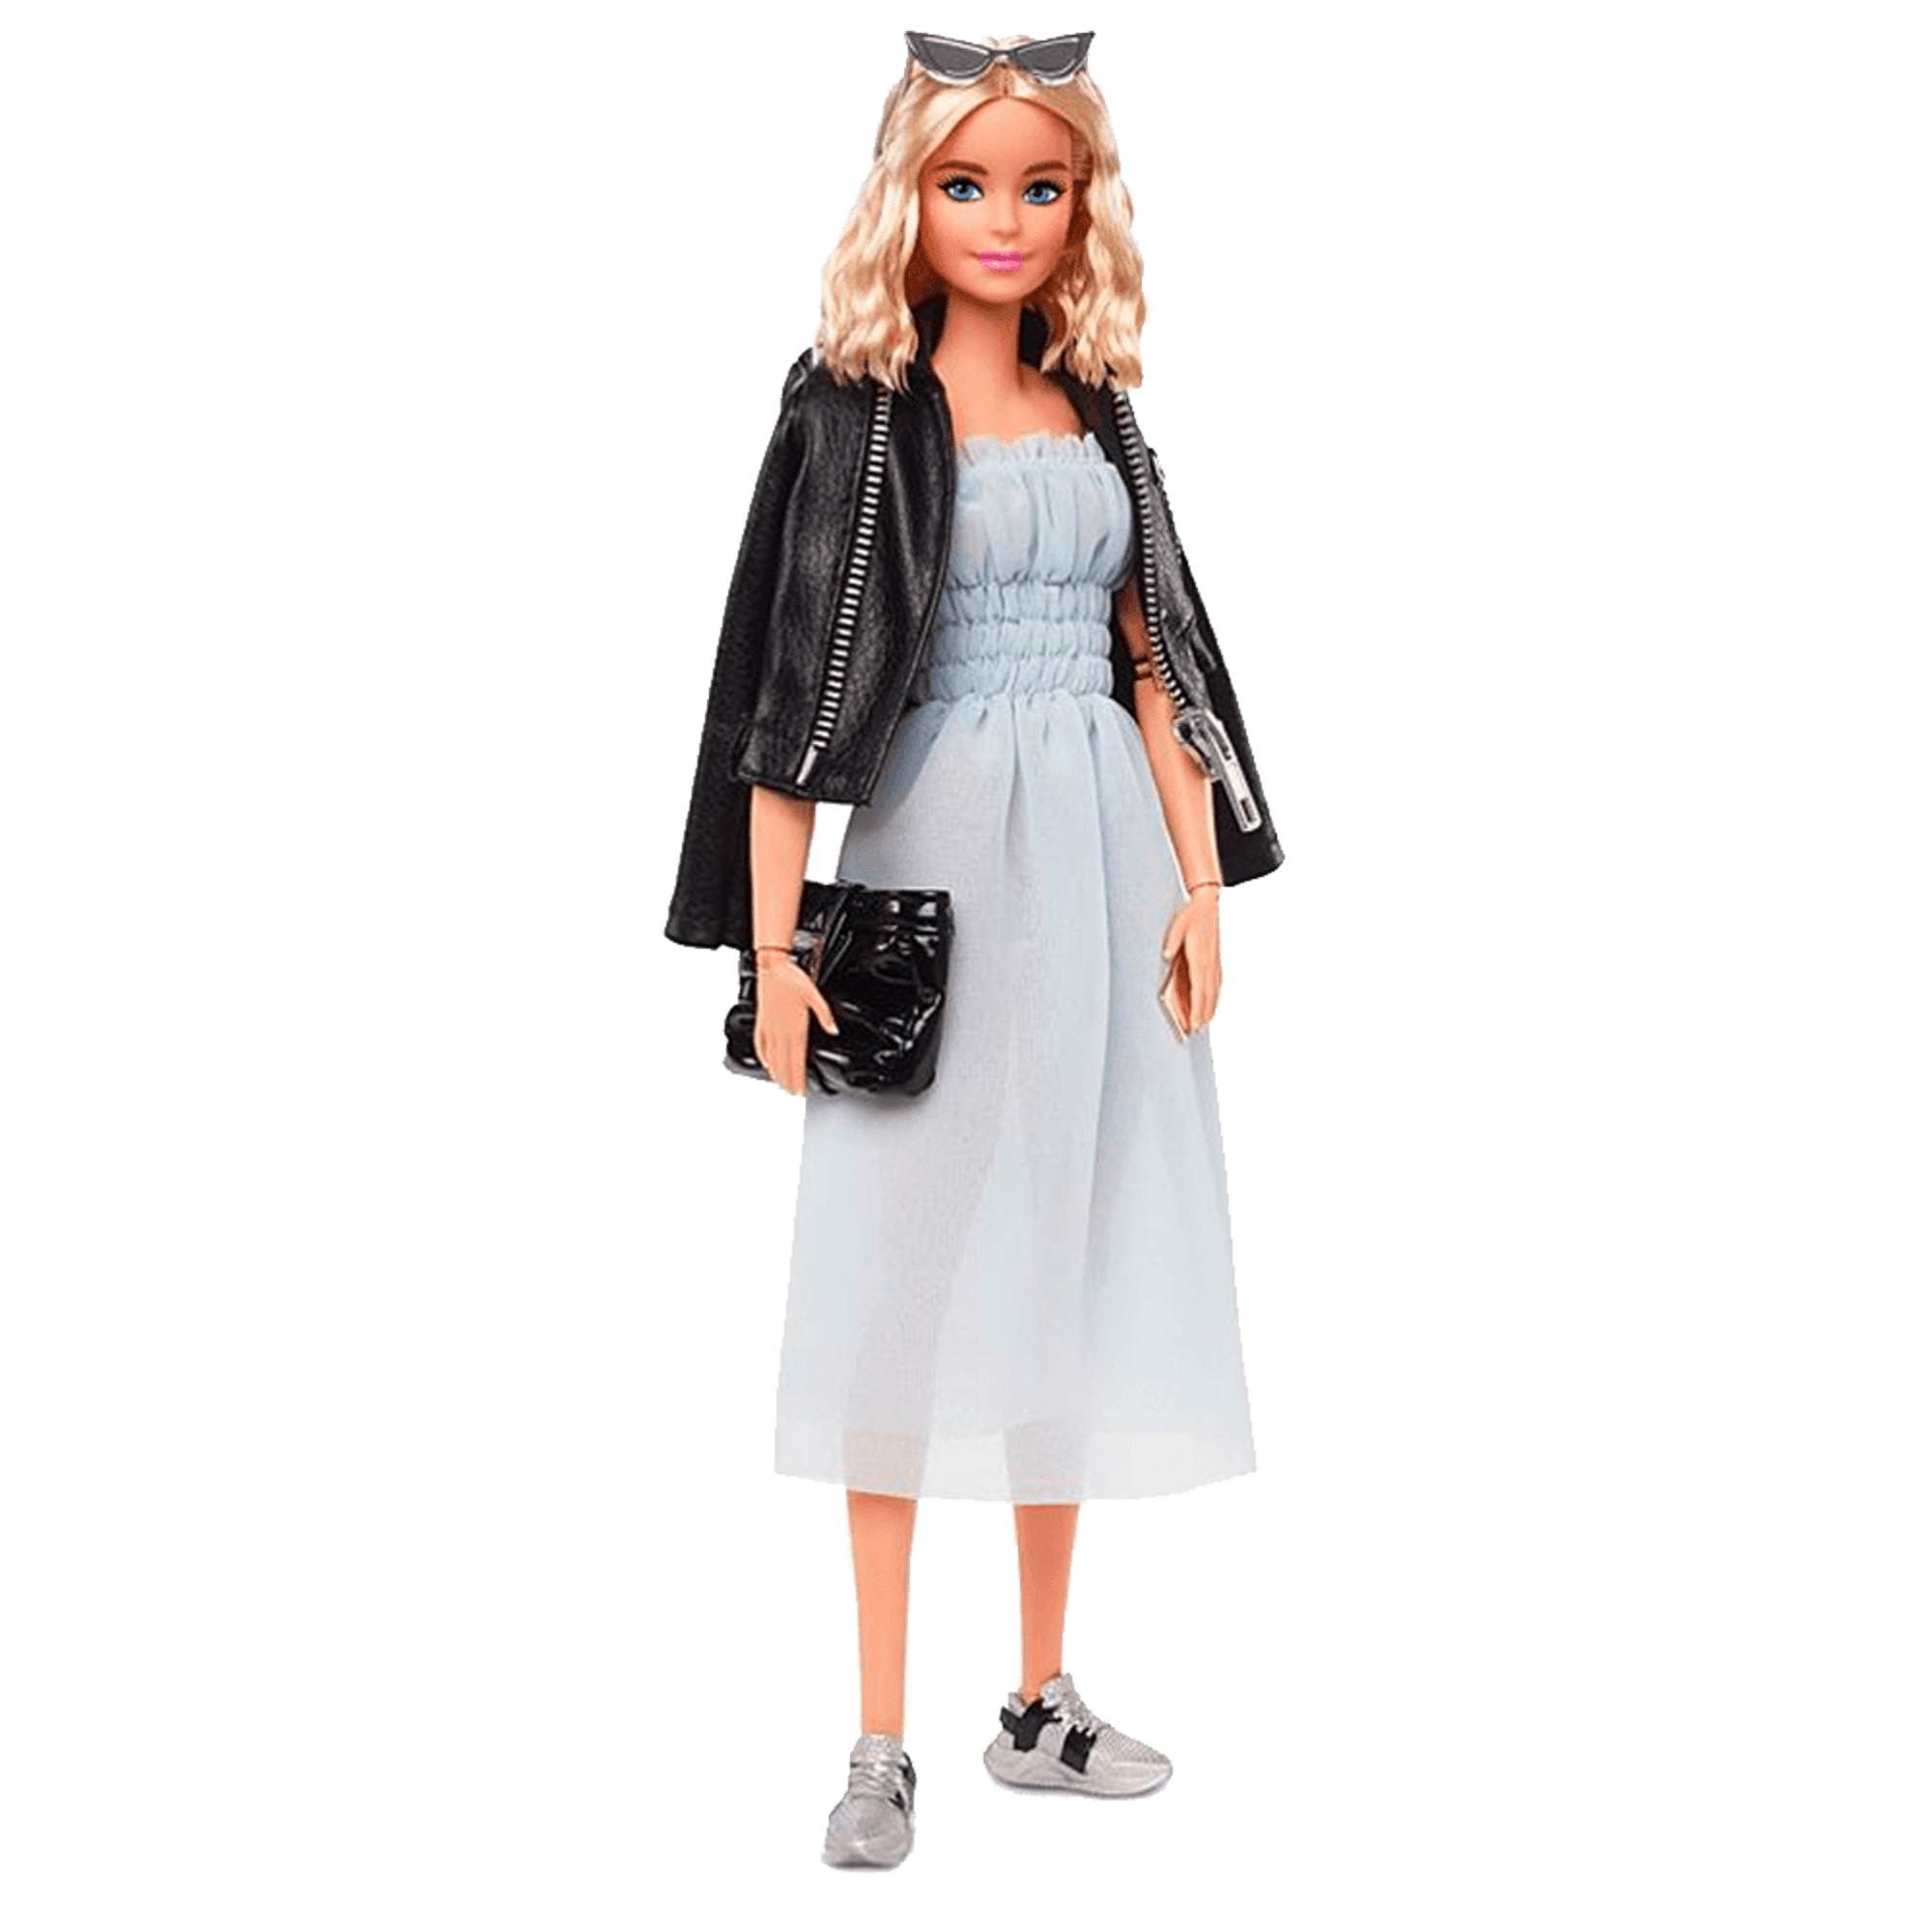 Doll Clothes for Barbie Dresses Gown with Shoes Algeria